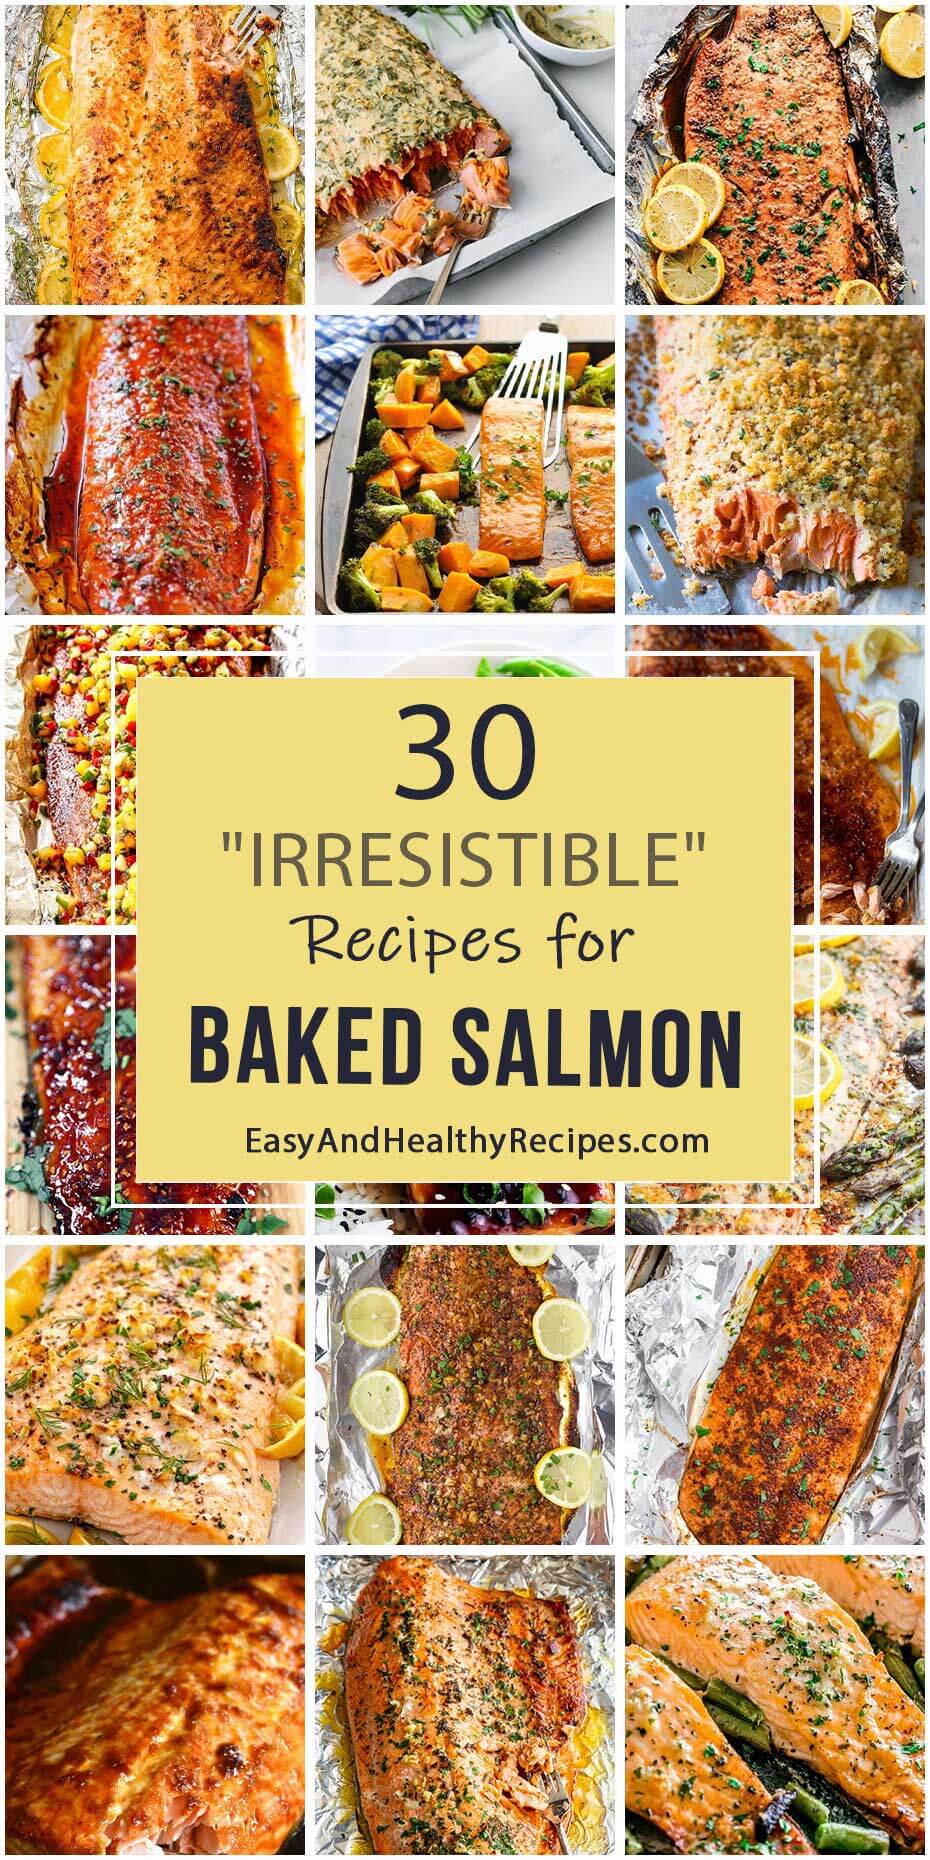 30 “Irresistible” Recipes For Baked Salmon, Baked Salmon